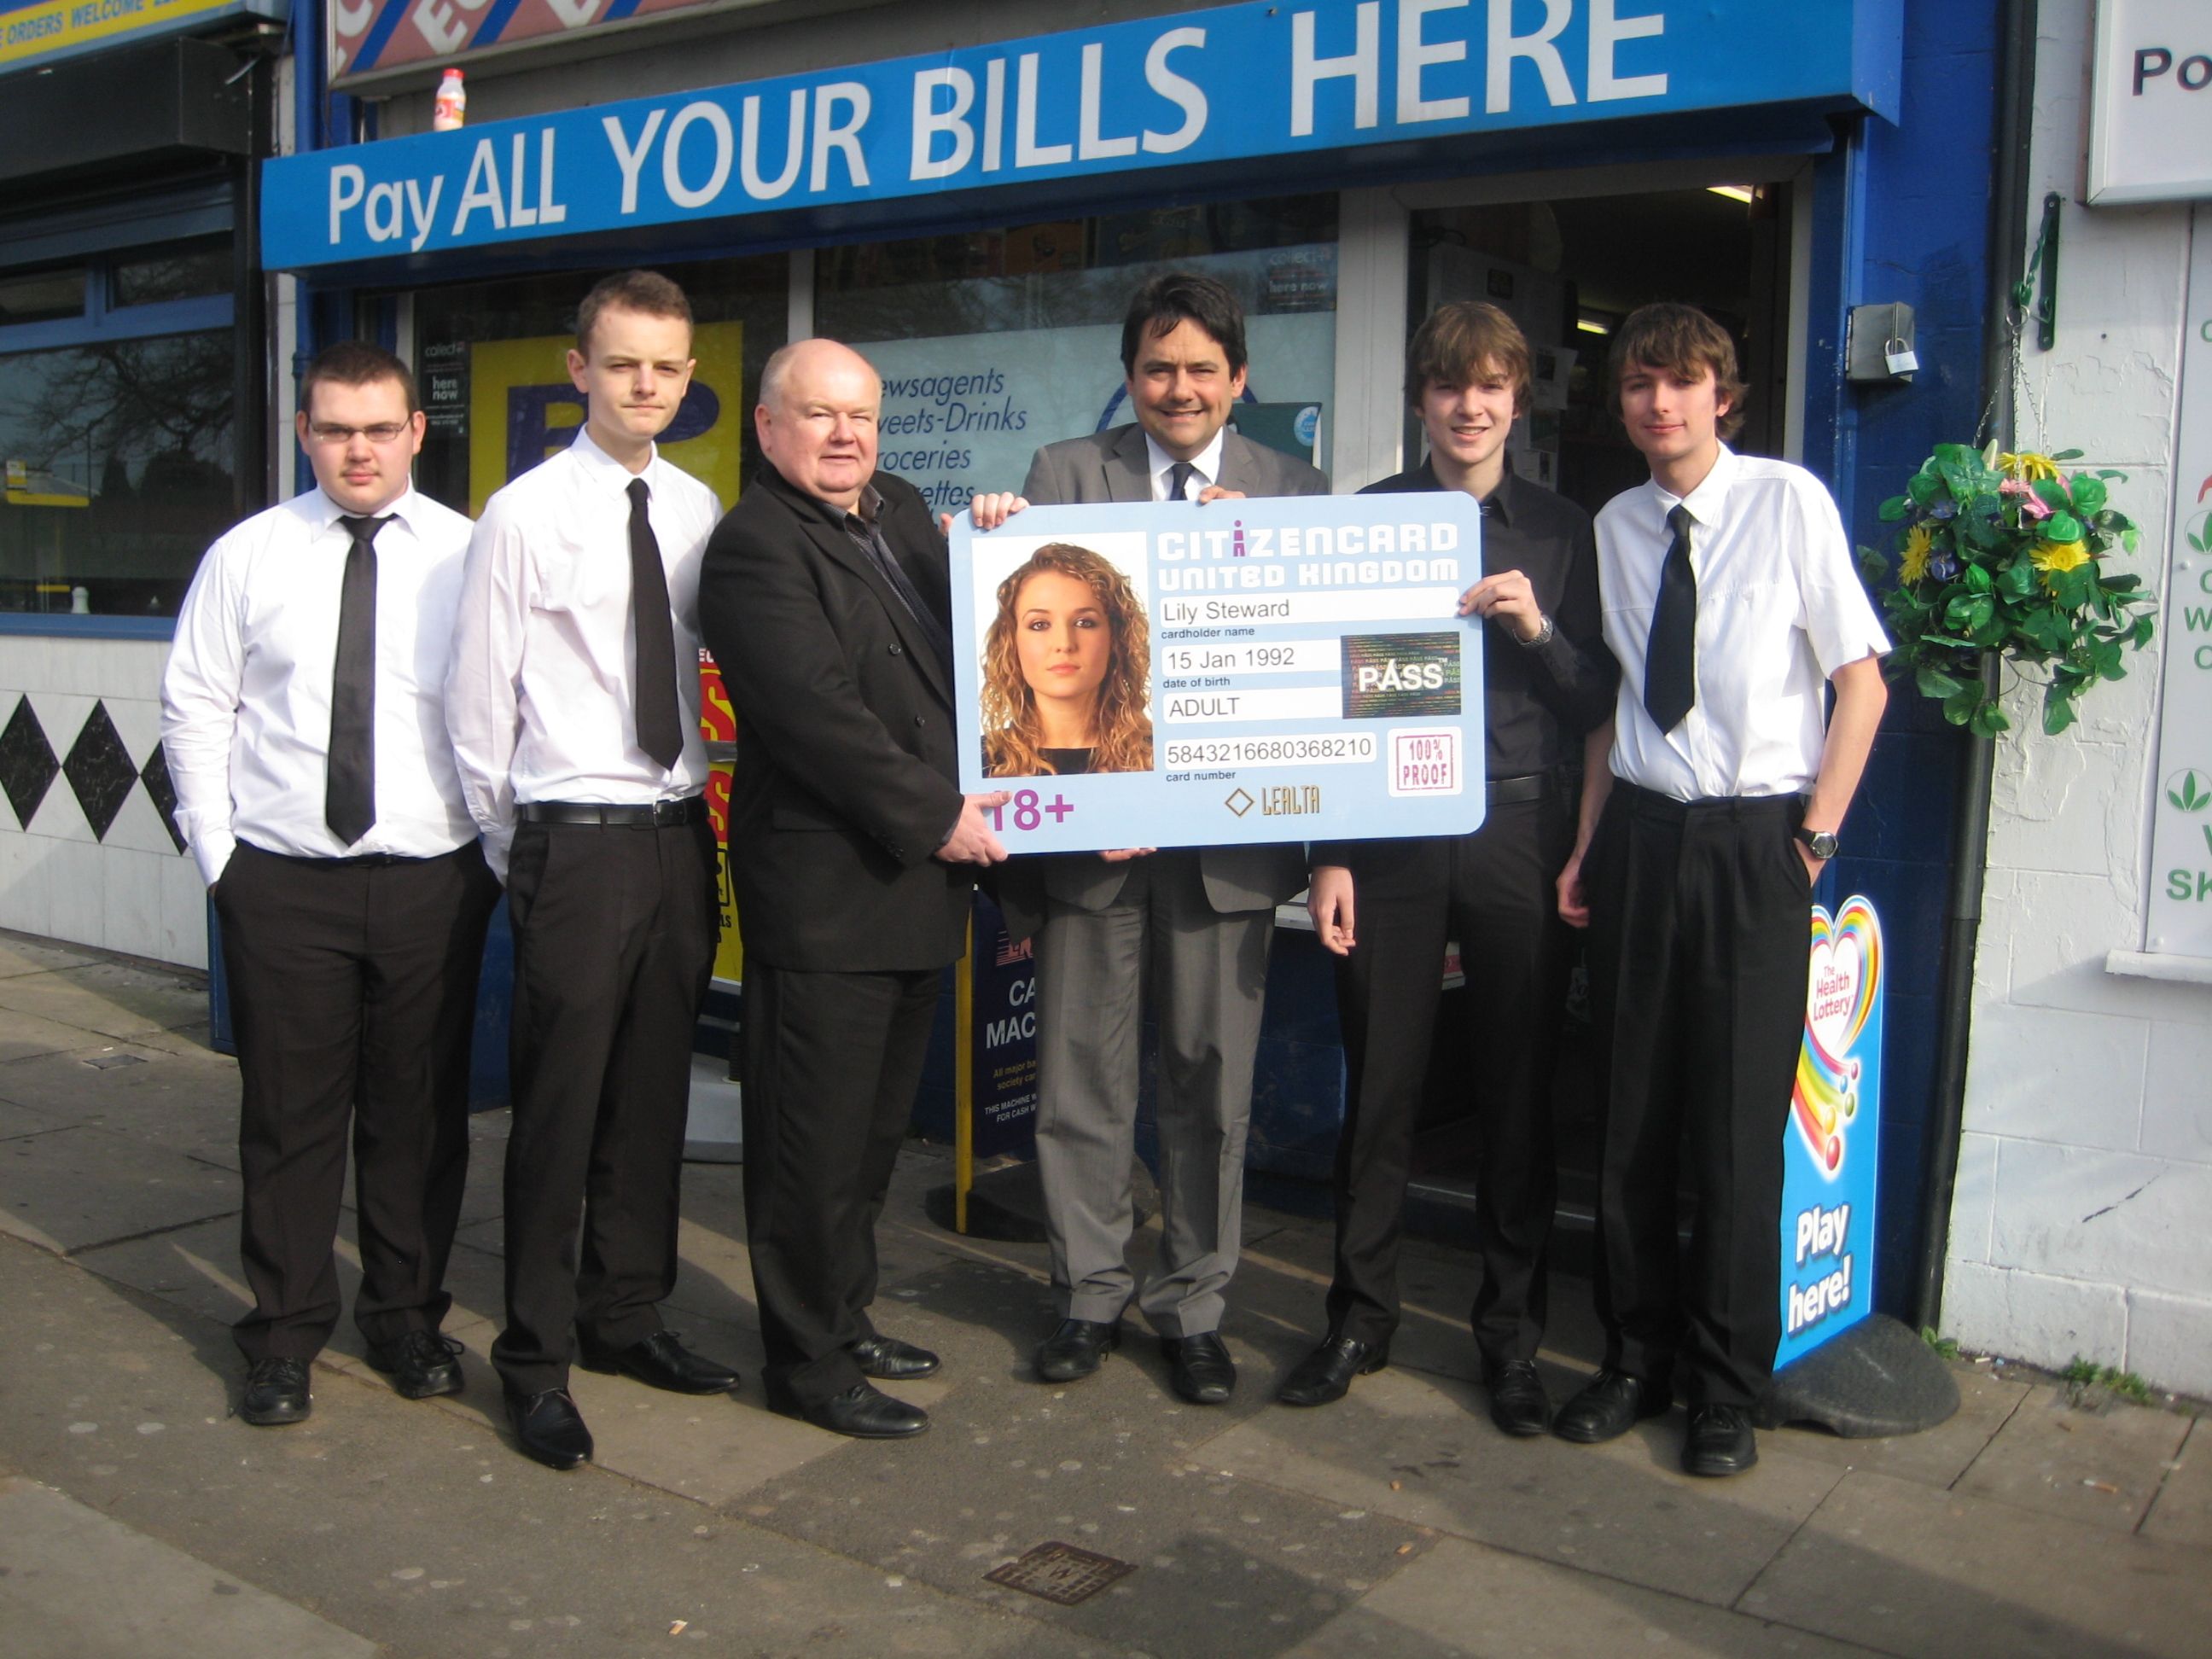 Stephen Twigg MP and students - CitizenCard launch in Liverpool, West Derby